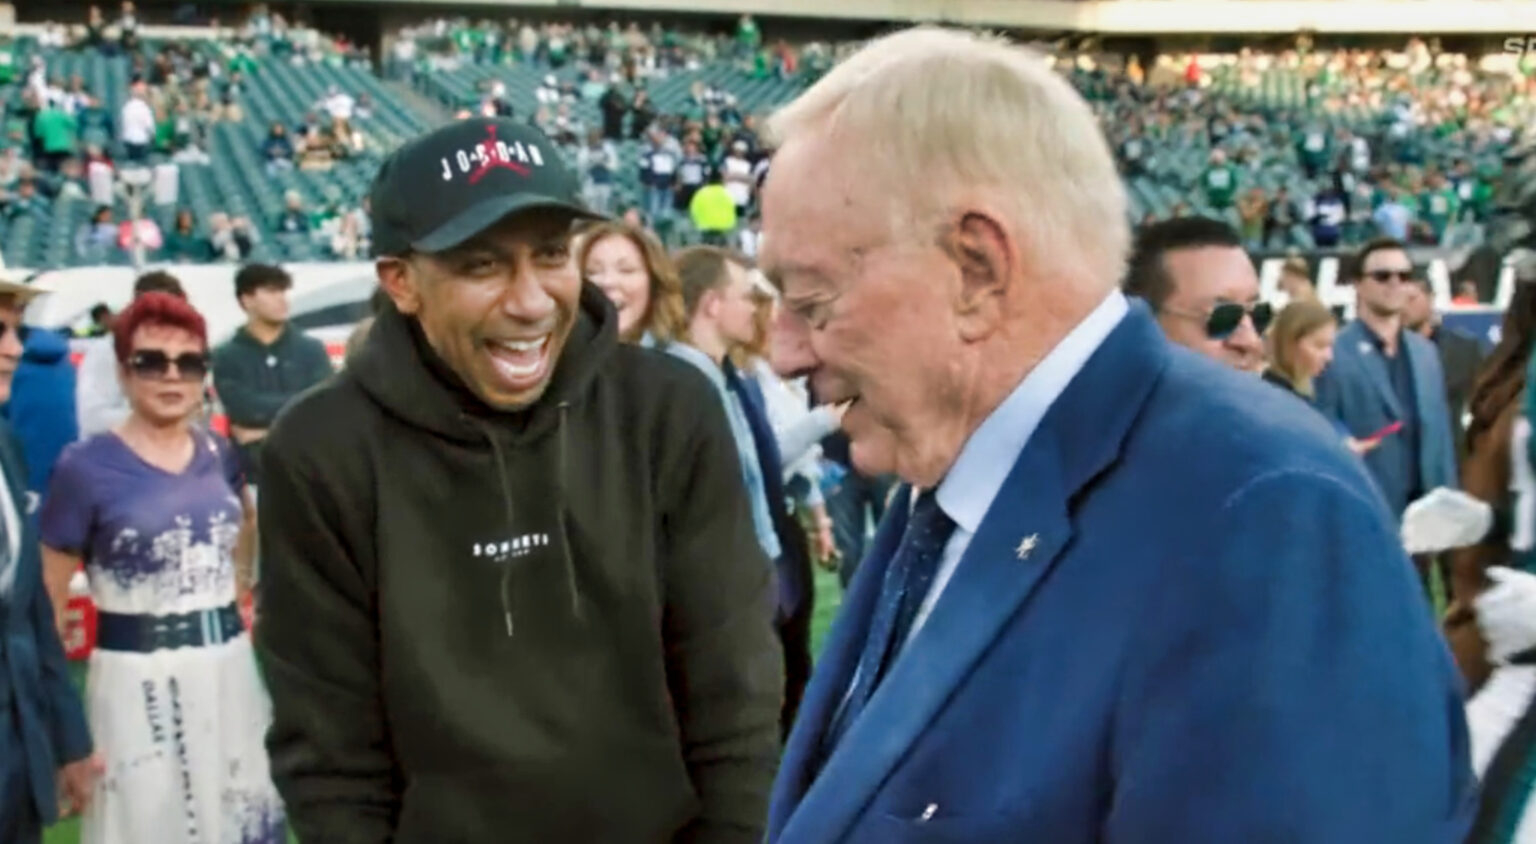 Cowboys Owner Jerry Jones and Stephen A. Smith Show Off Their Swag With Each Other